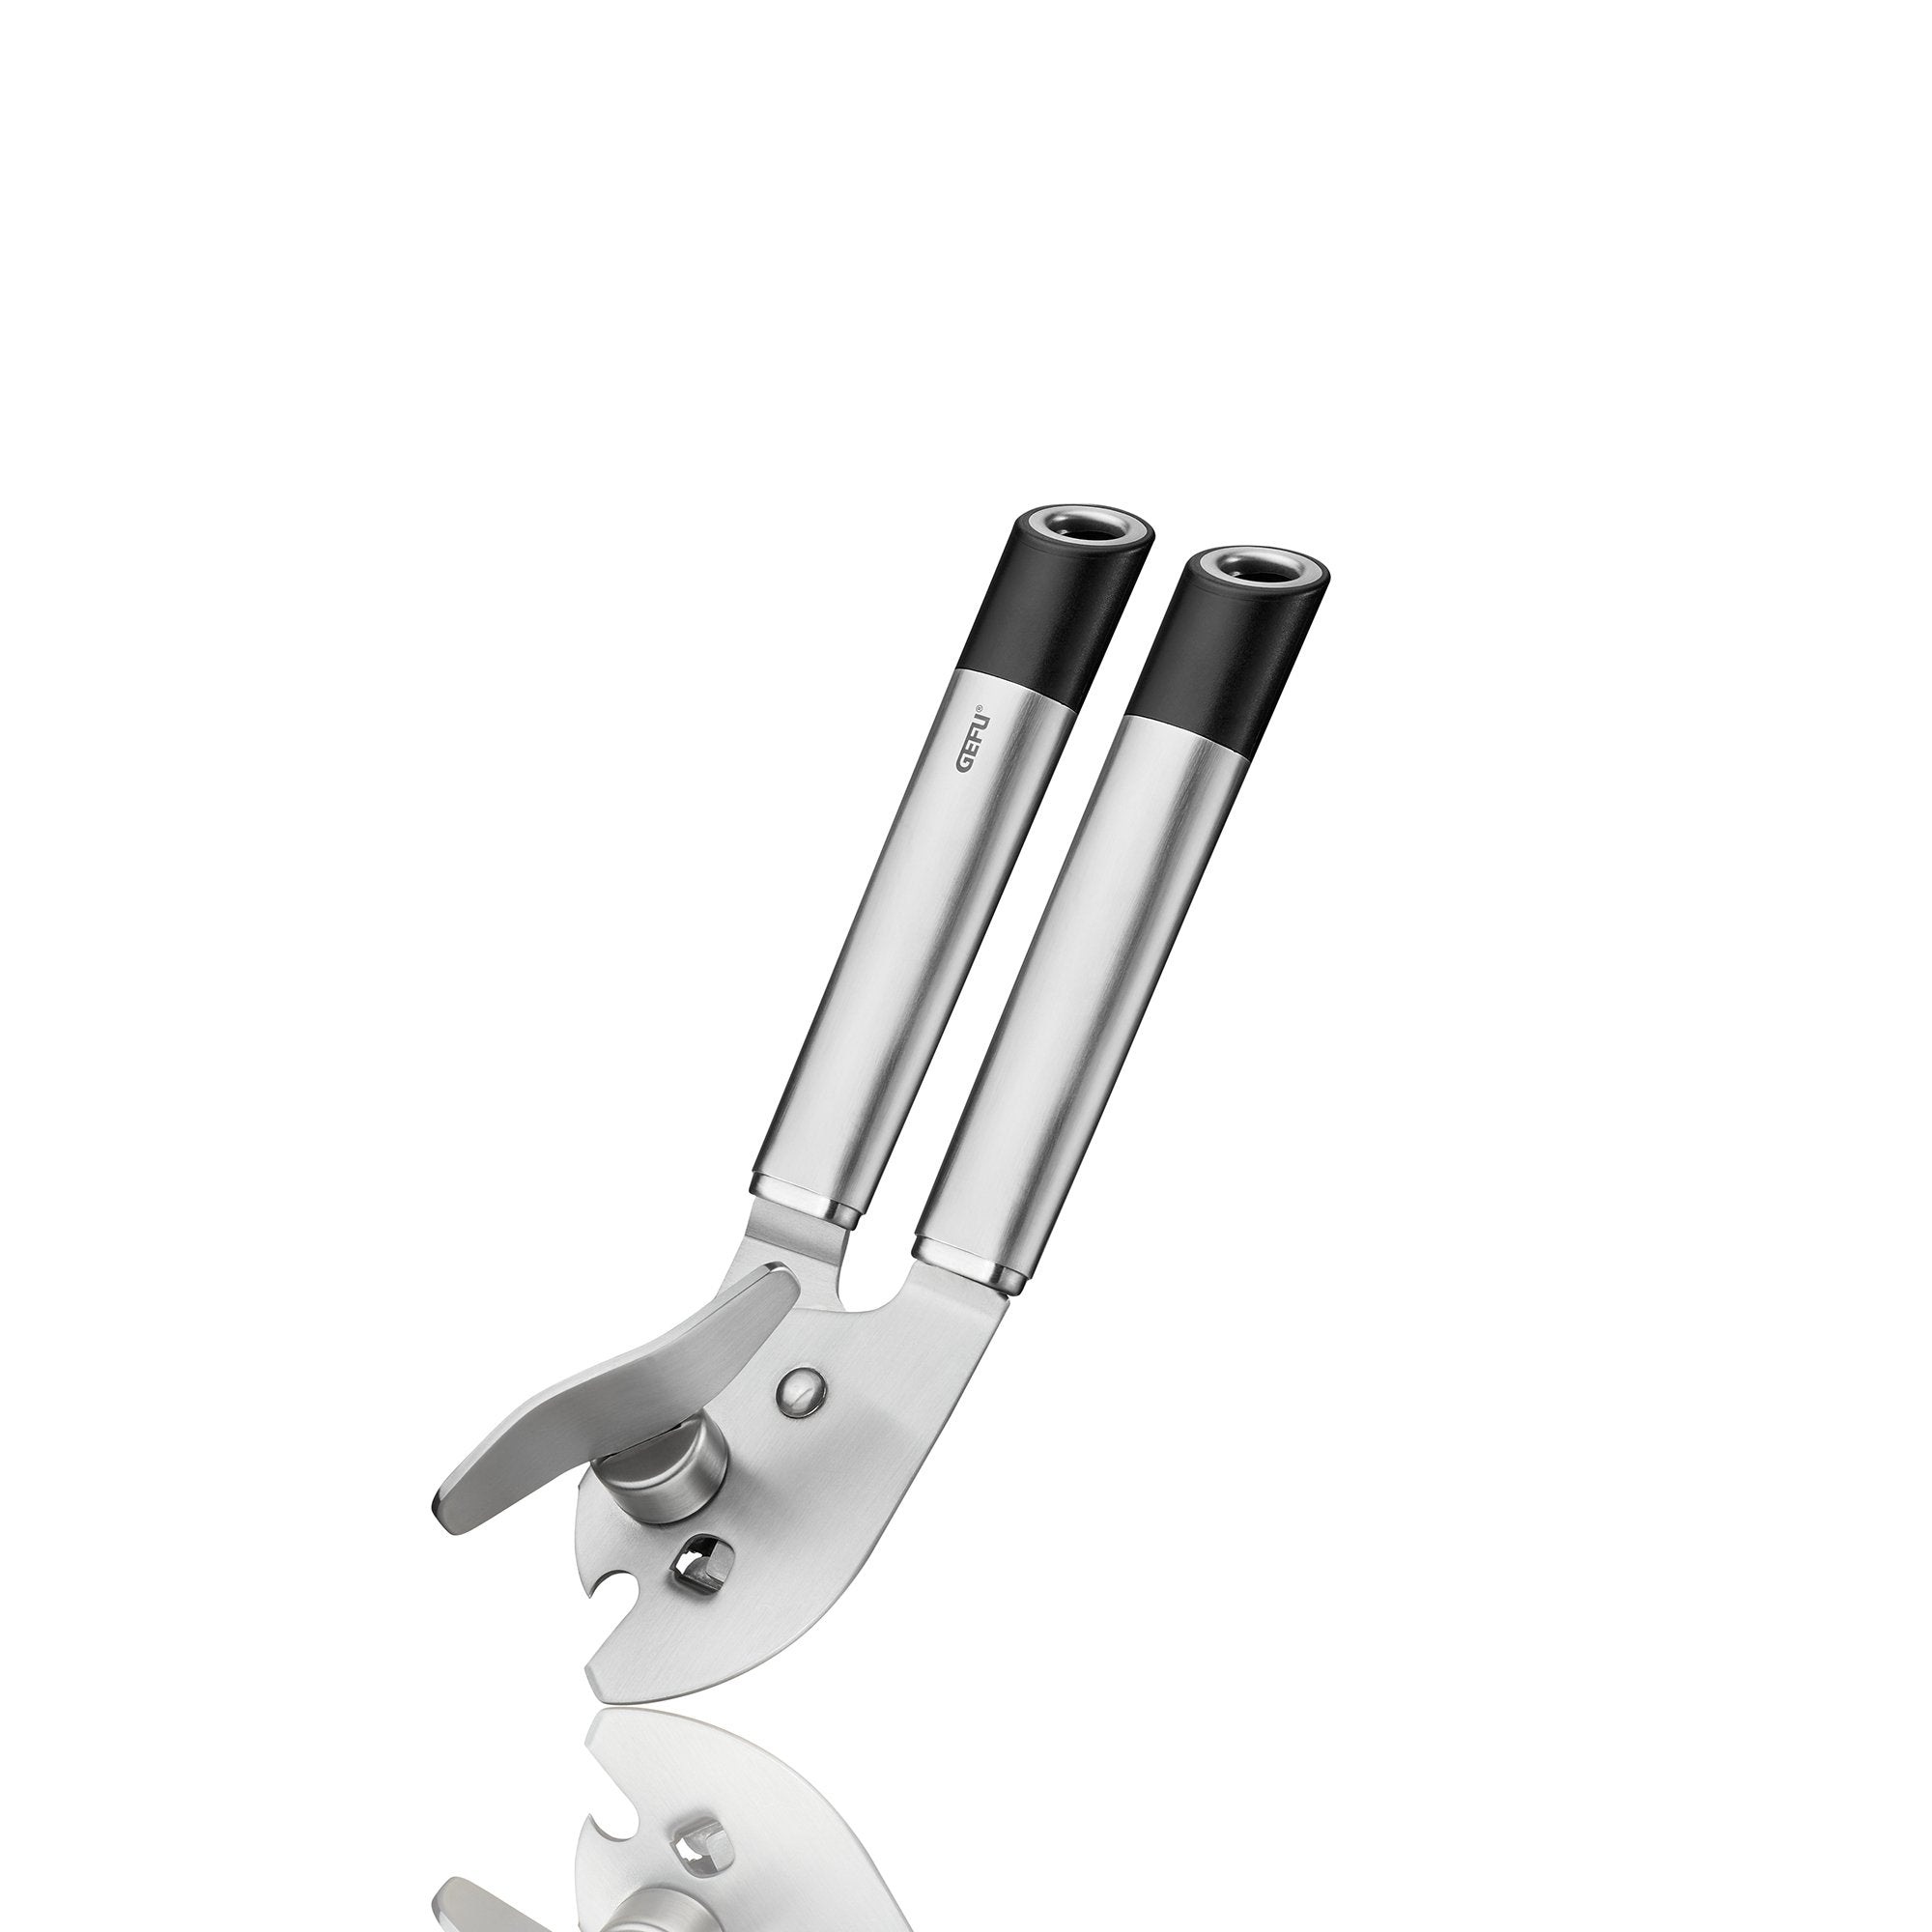 GEFU Can Opener Primeline - Whole and All